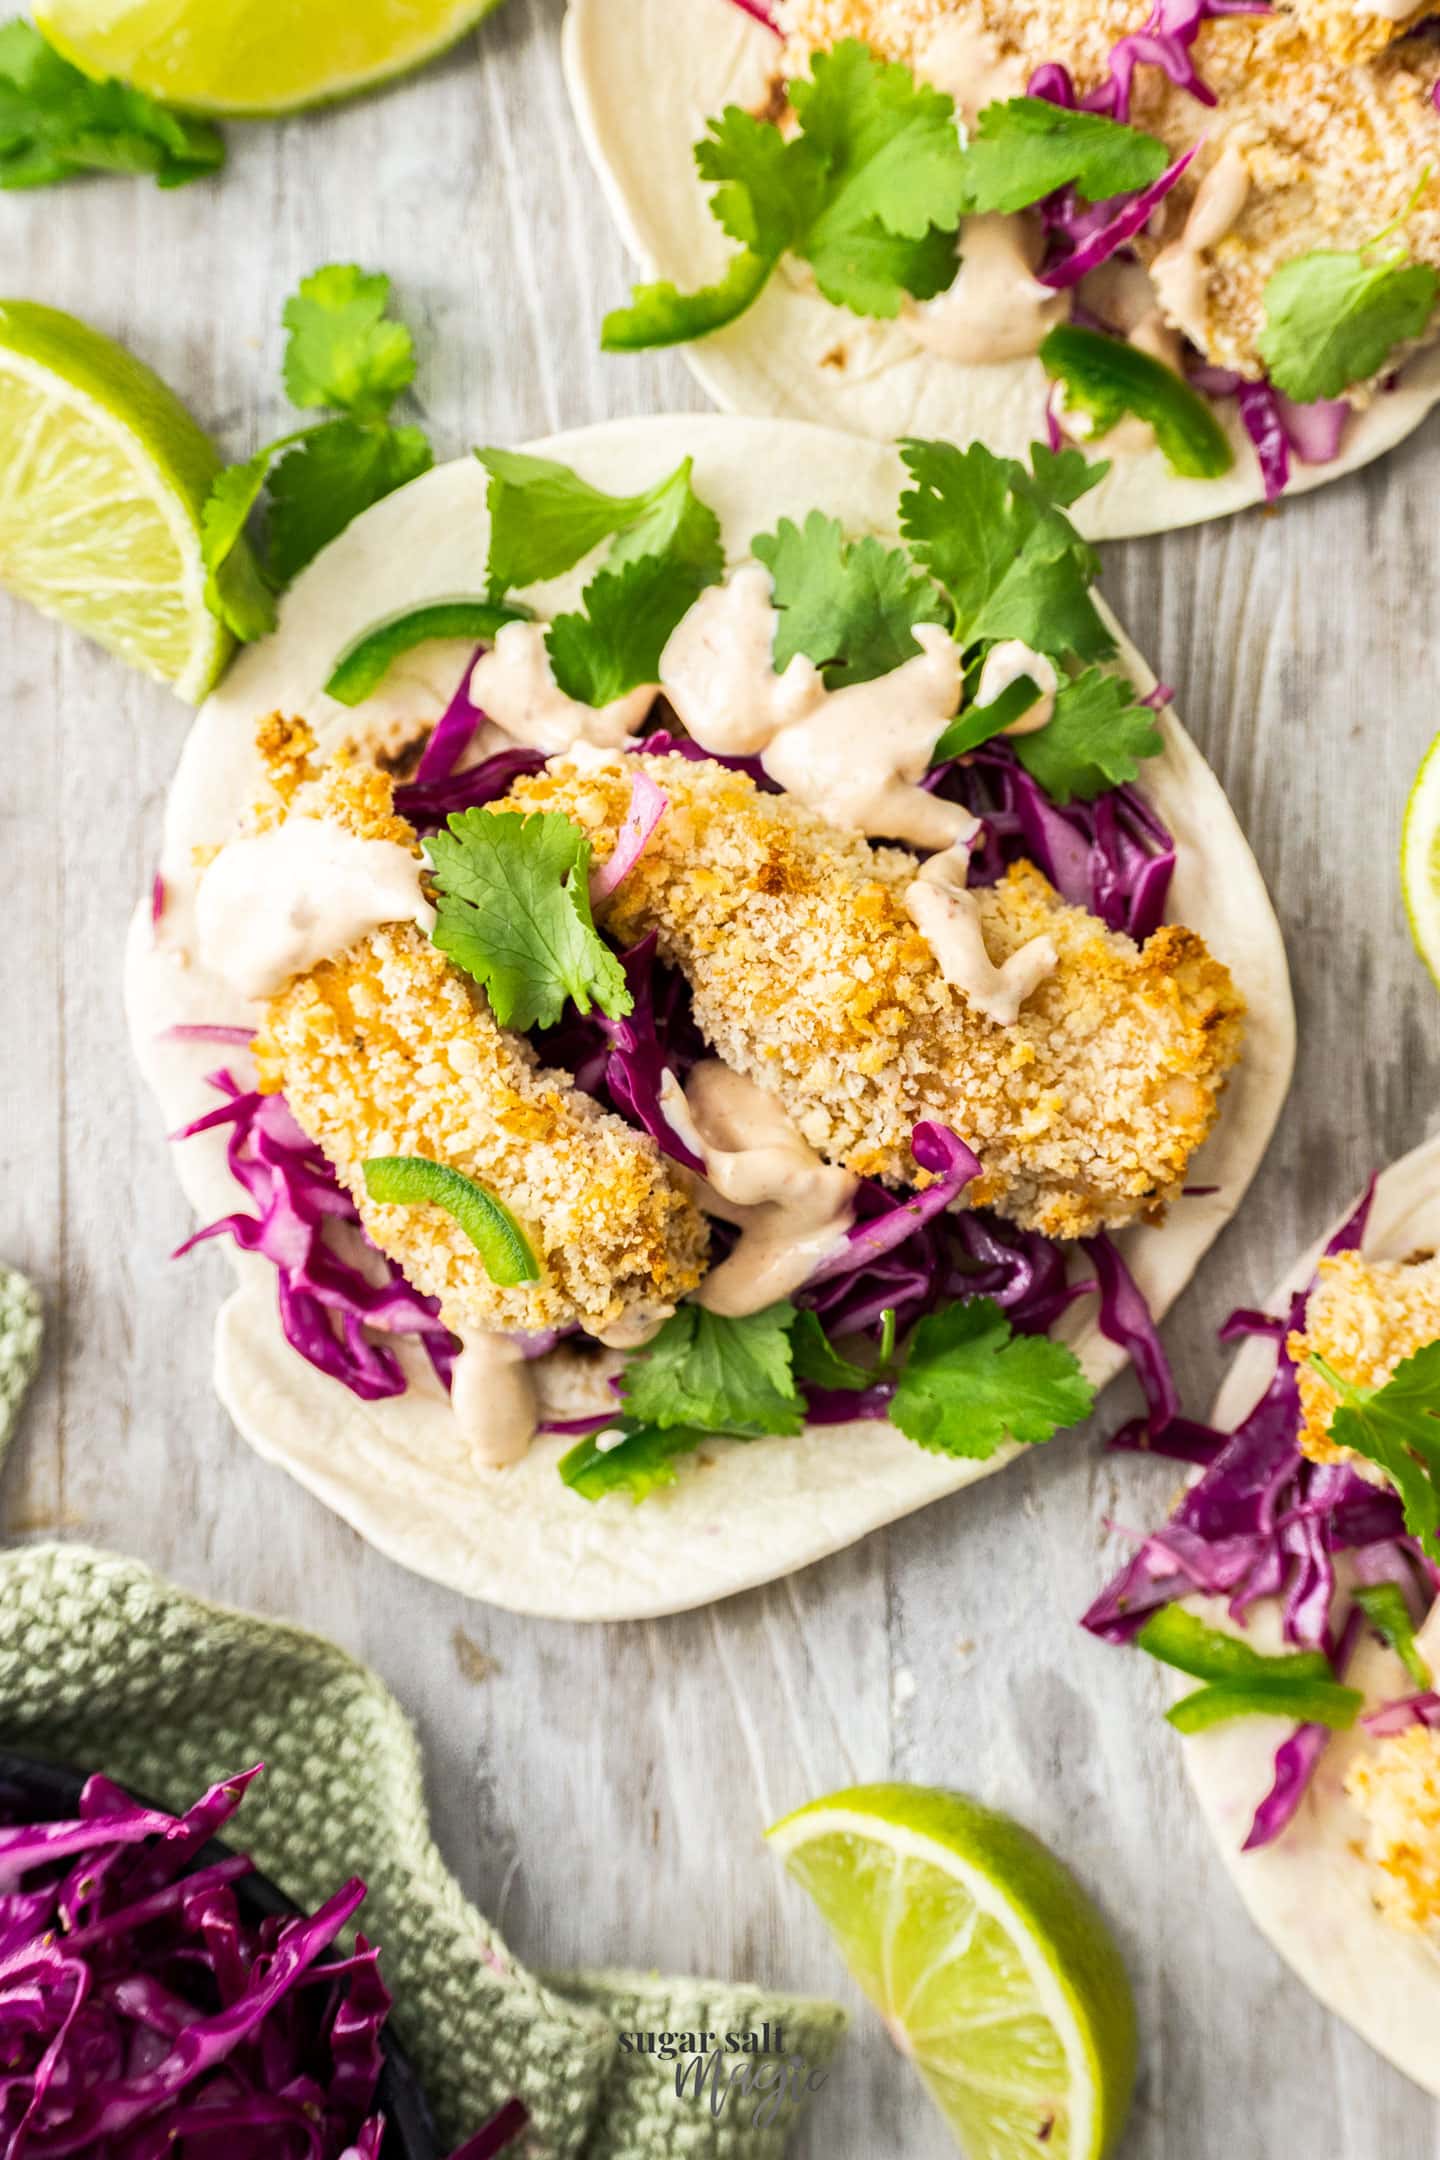 Two pieces of fish on a tortilla with cabbage and coriander.